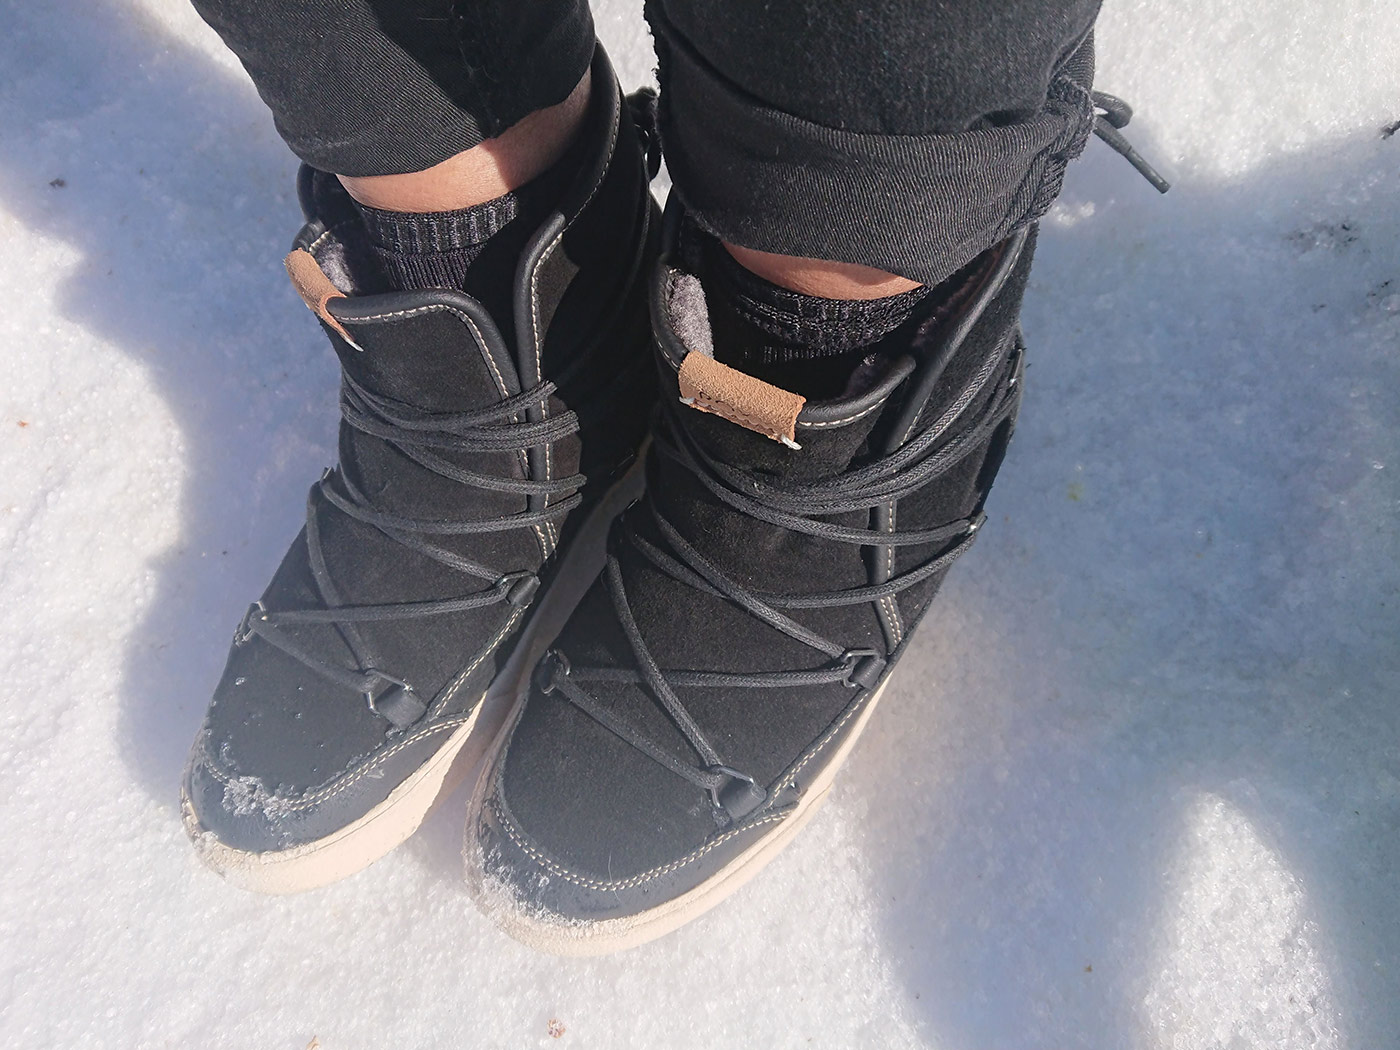 Roxy Darwin snow boots review